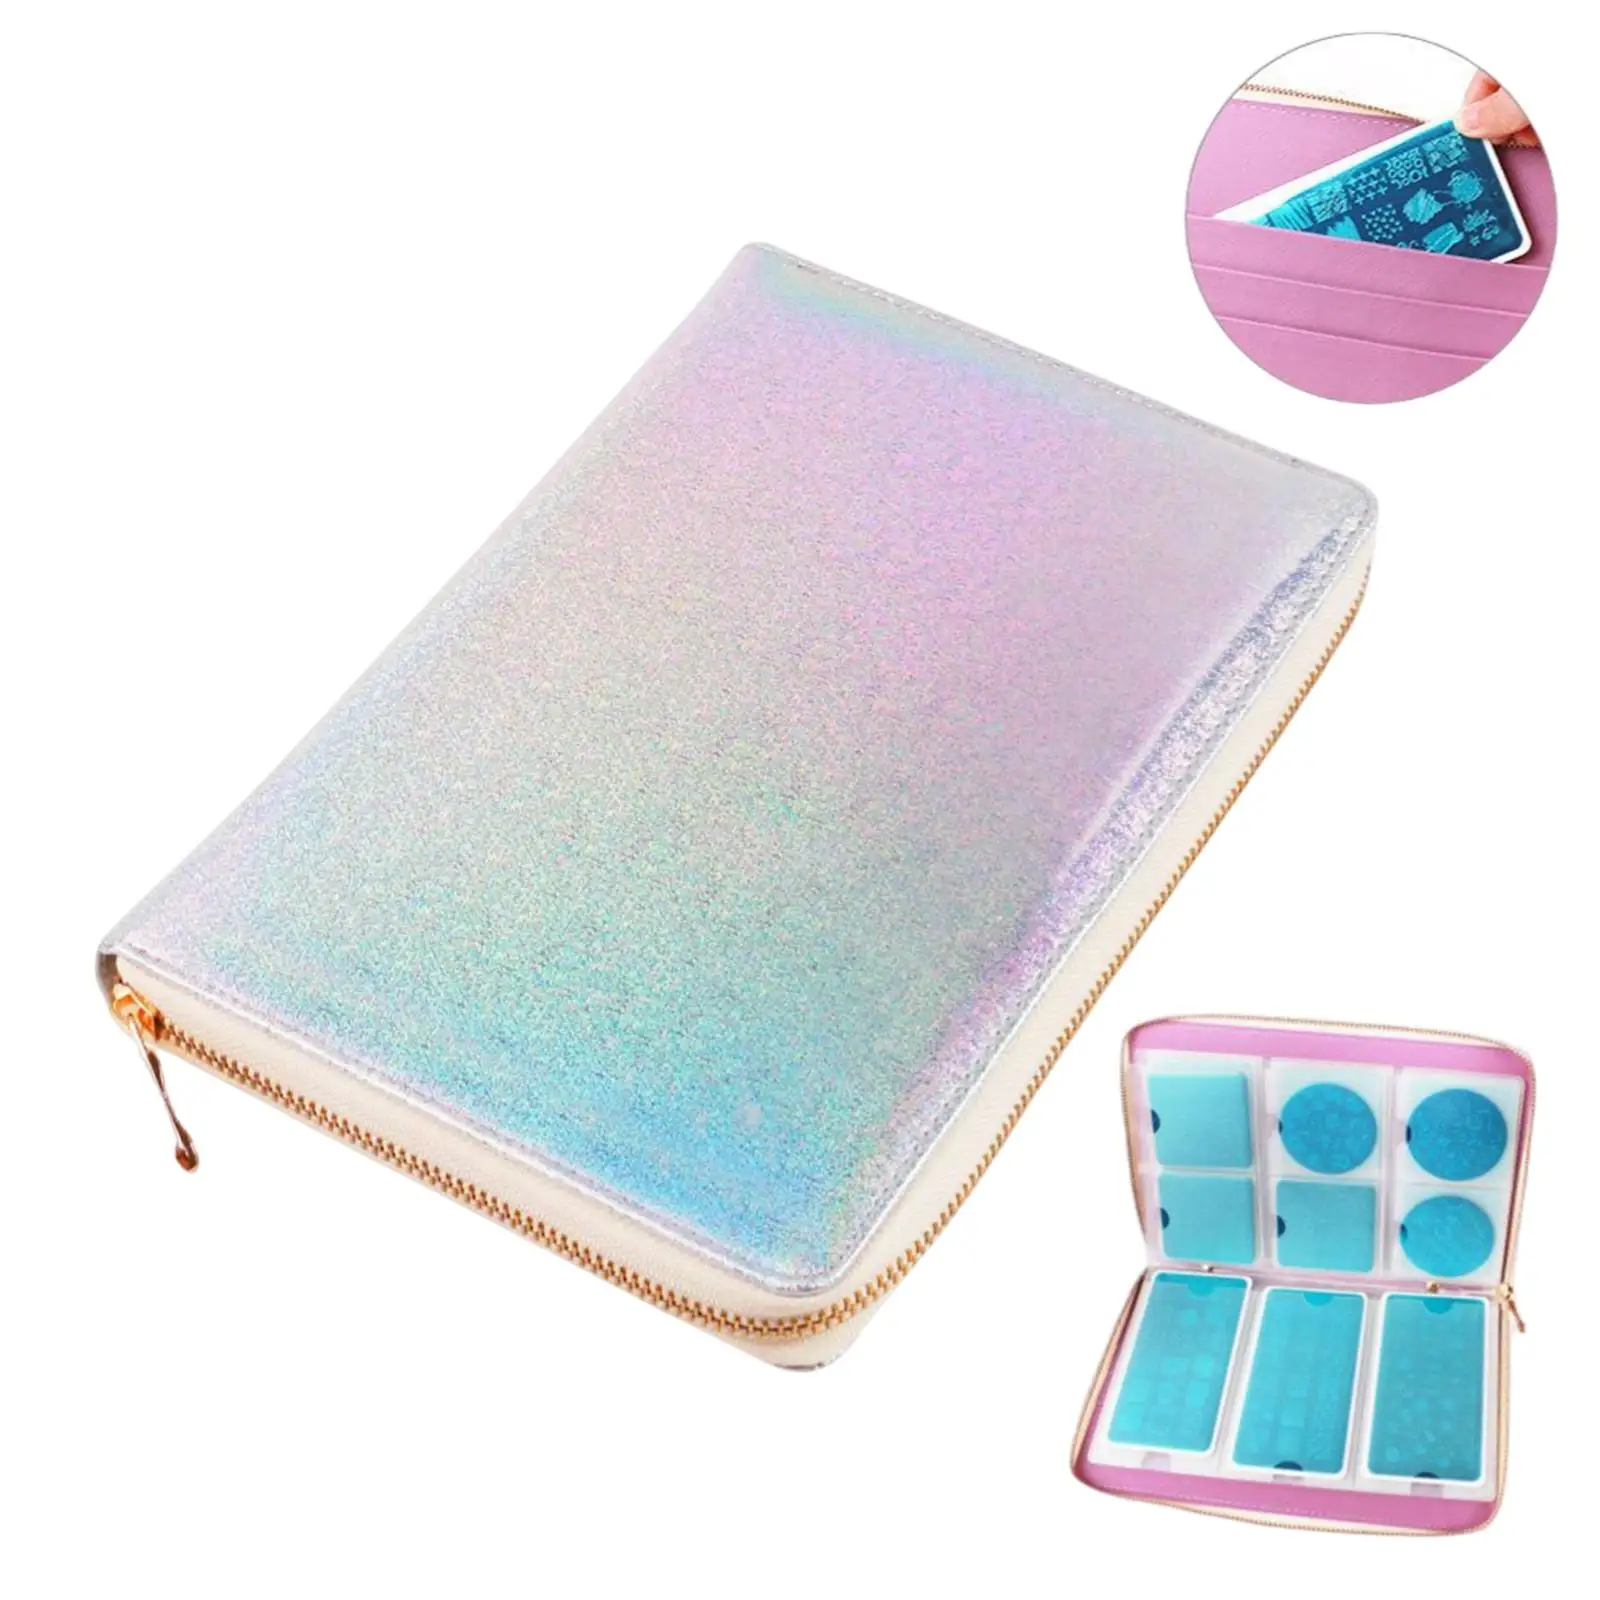 Nail Template Case Rectangular DIY Tool Storage Printing Molds Collection for Nail Art Plates Accessories